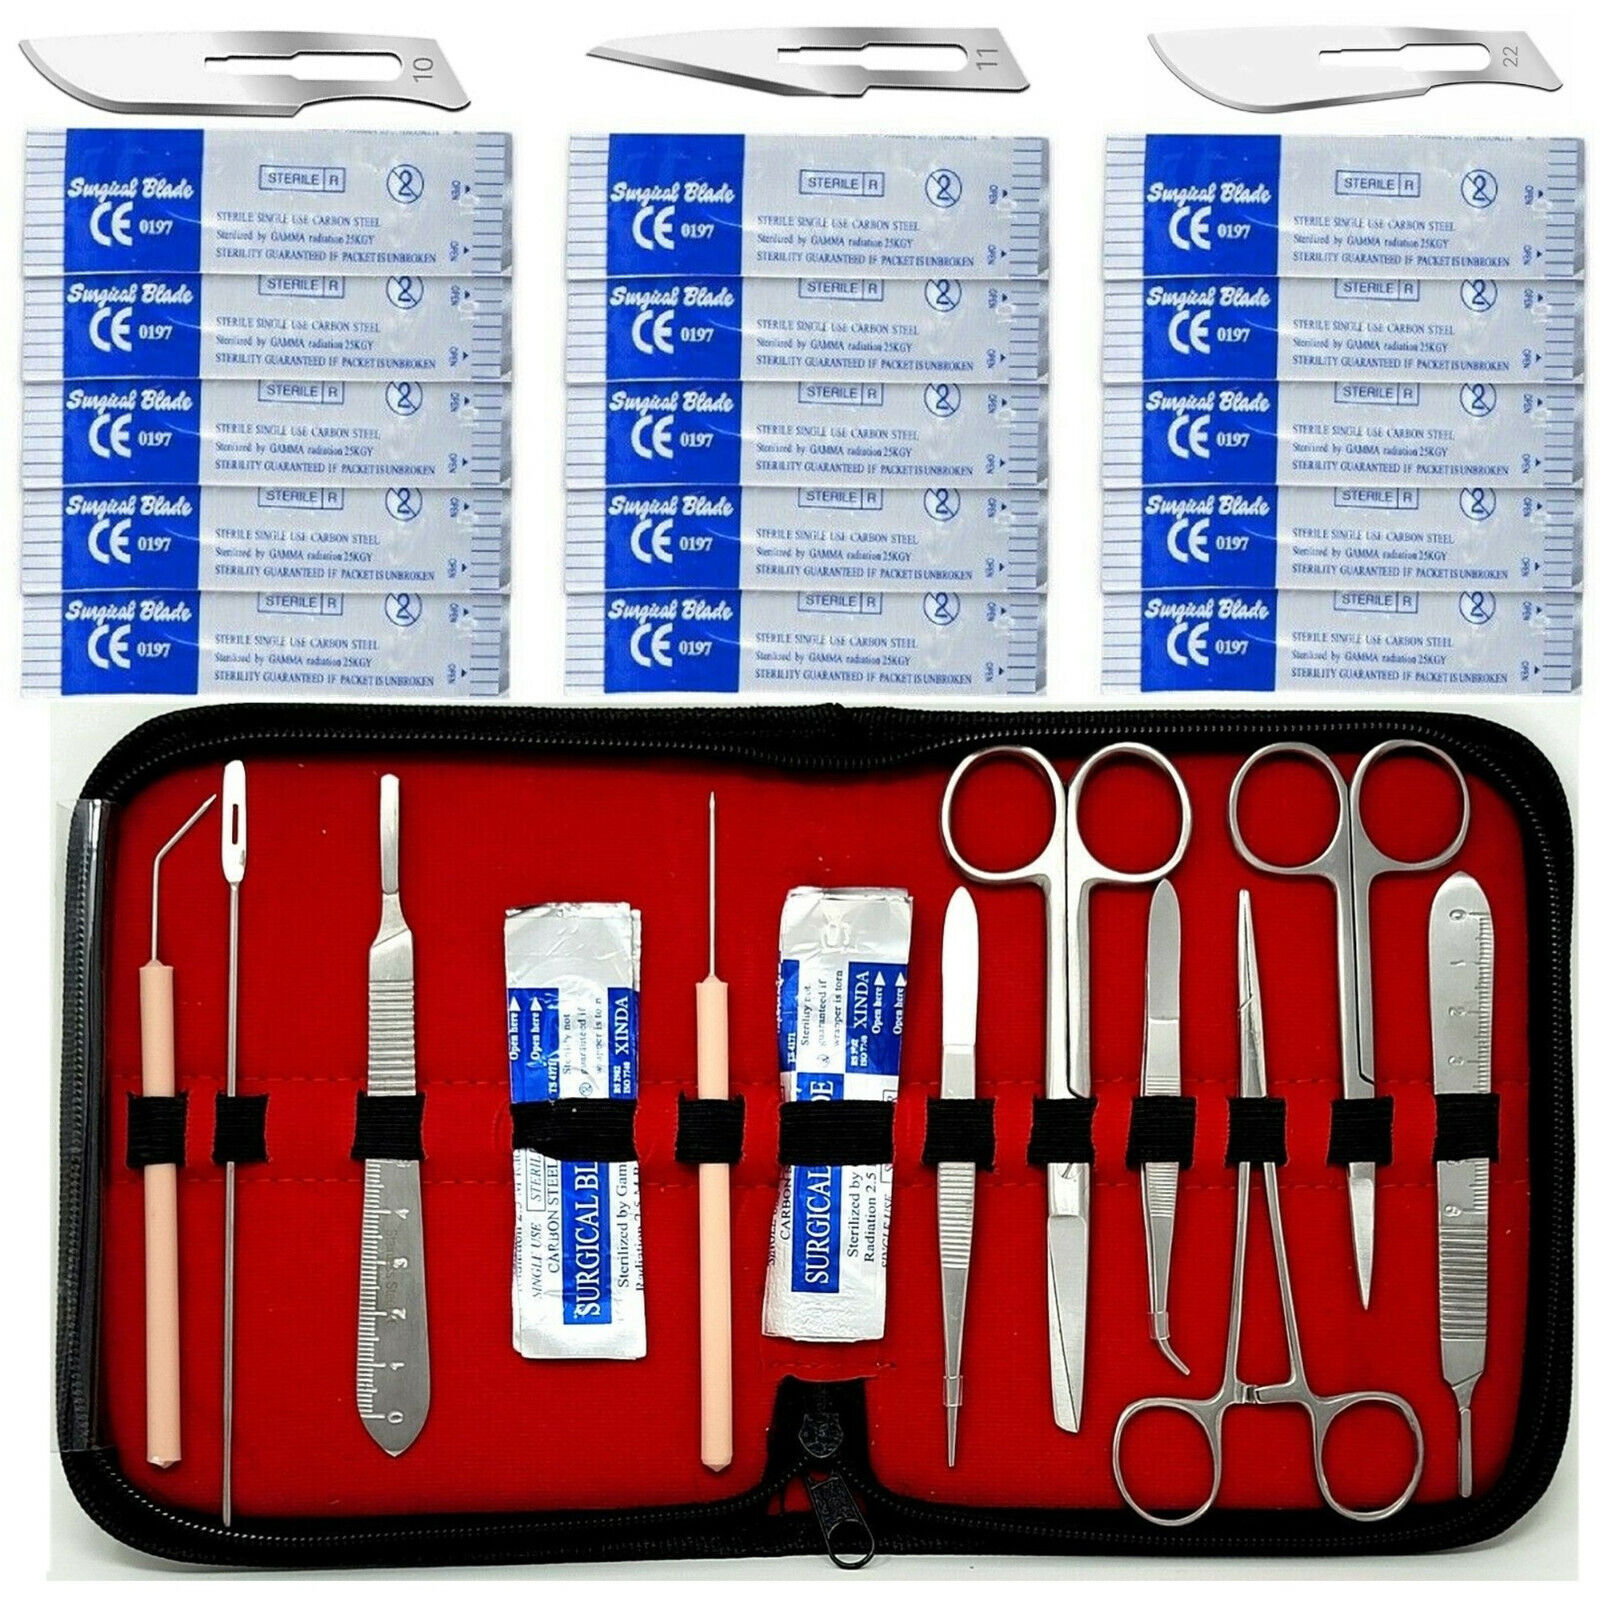 Surgical Suture Kit Basic First Aid Set Suture Emergency Trauma Survival Pack HTI Does Not Apply